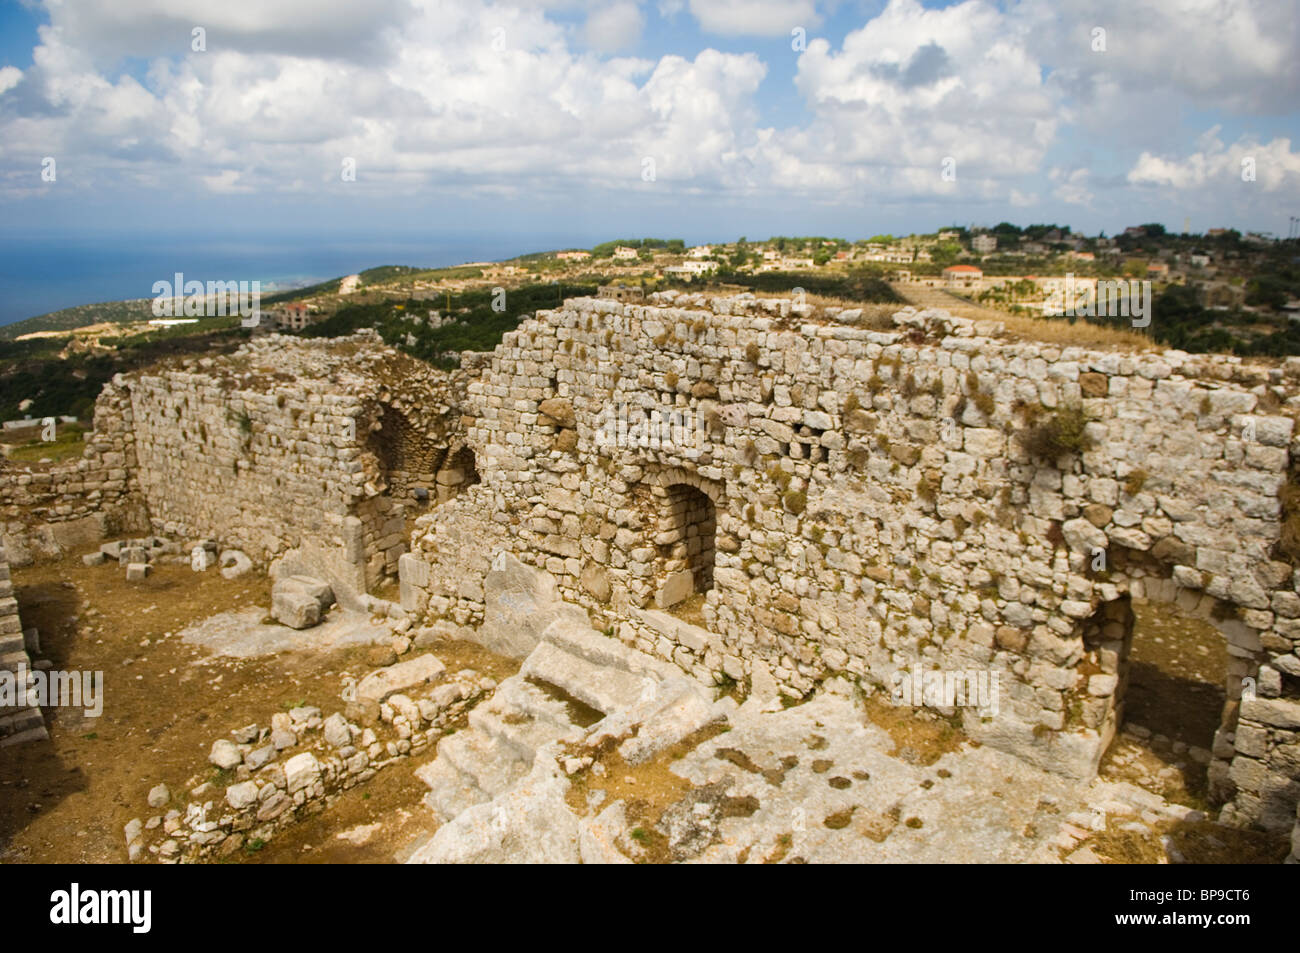 The Citadel Crusader castle ruins 12th century in Smar Jbeil Lebanon Middle East Stock Photo